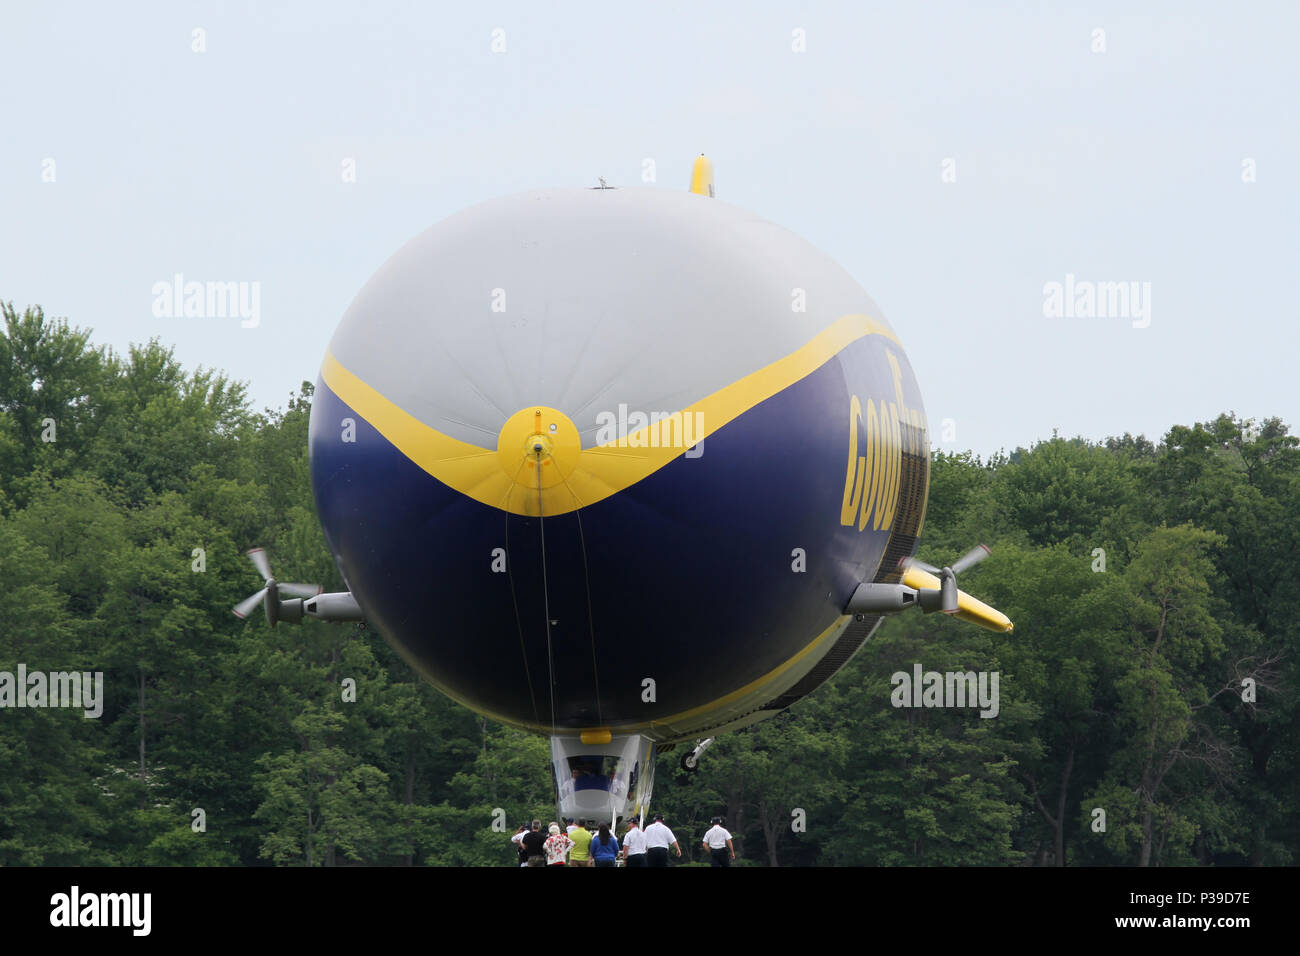 SUFFIELD, OHIO / USA – JUNE 16: The Goodyear blimp Wingfoot One on June 16, at Wingfoot Lake, Suffield, Ohio. This is at Blimp Base One, home of the G Stock Photo